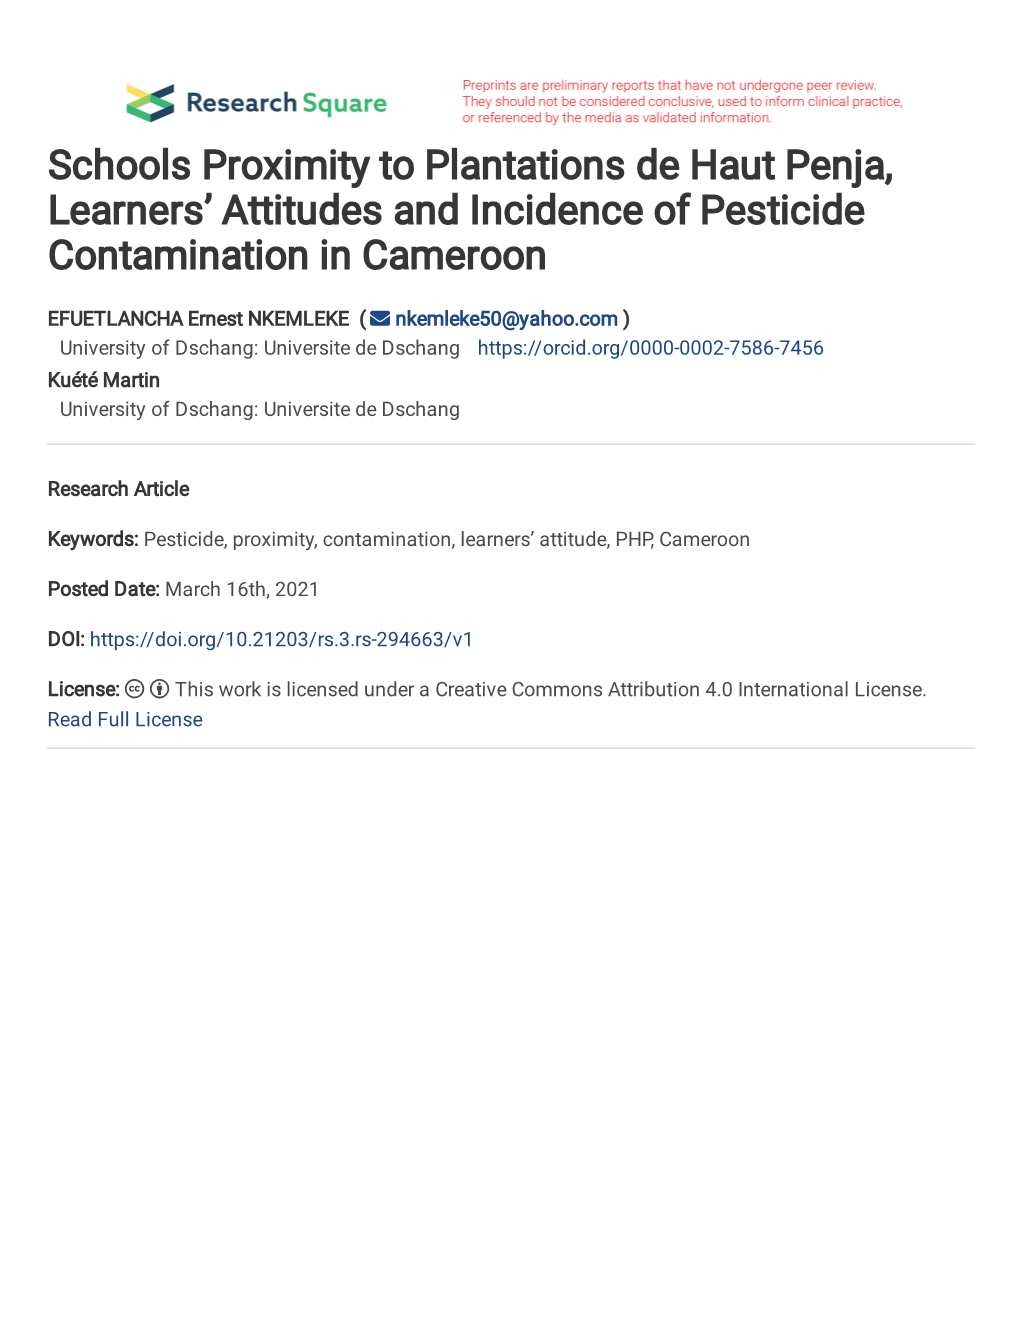 Schools Proximity to Plantations De Haut Penja, Learners' Attitudes and Incidence of Pesticide Contamination in Cameroon